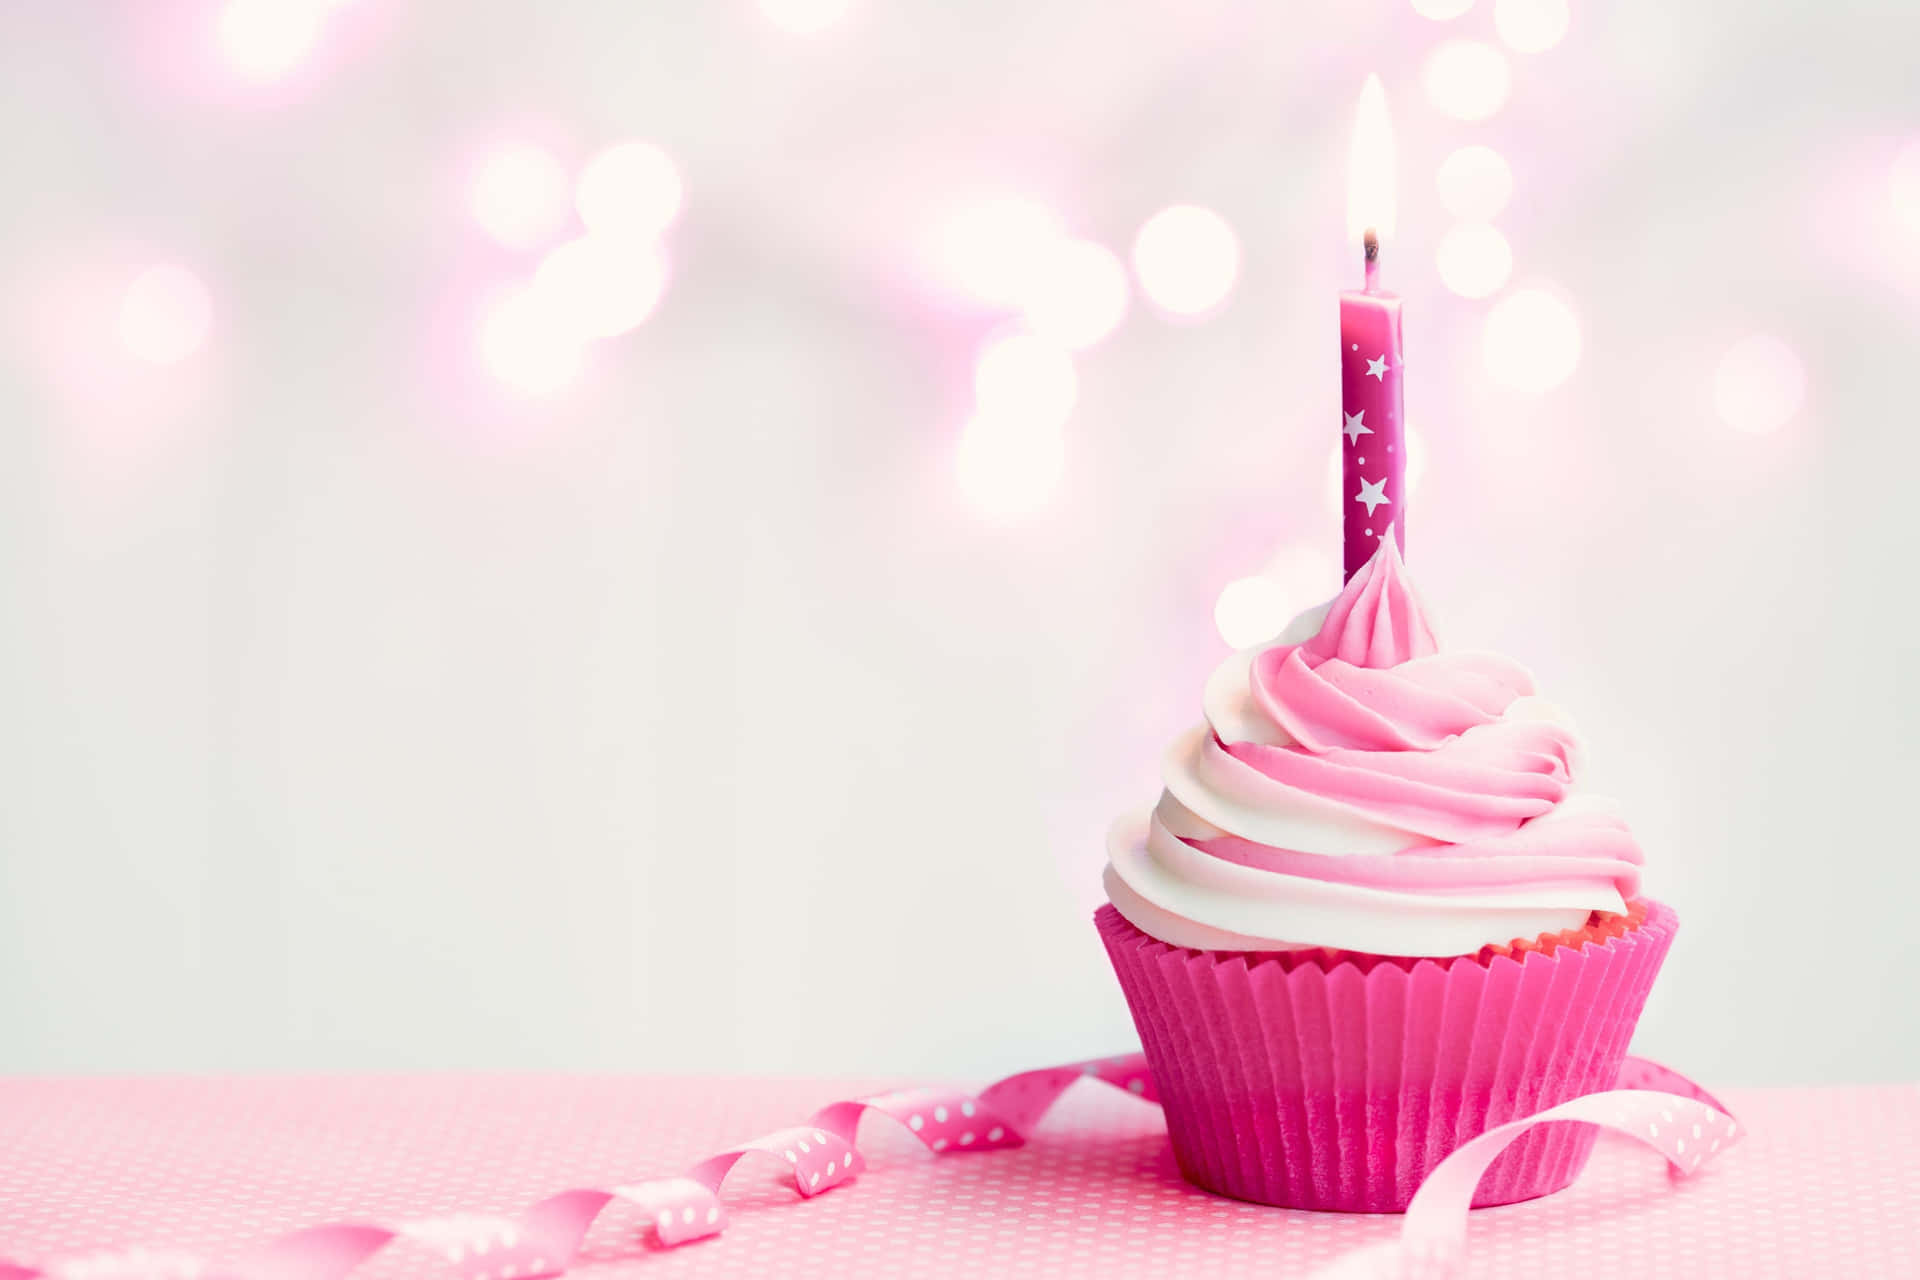 A Pink Cupcake With A Candle On Top